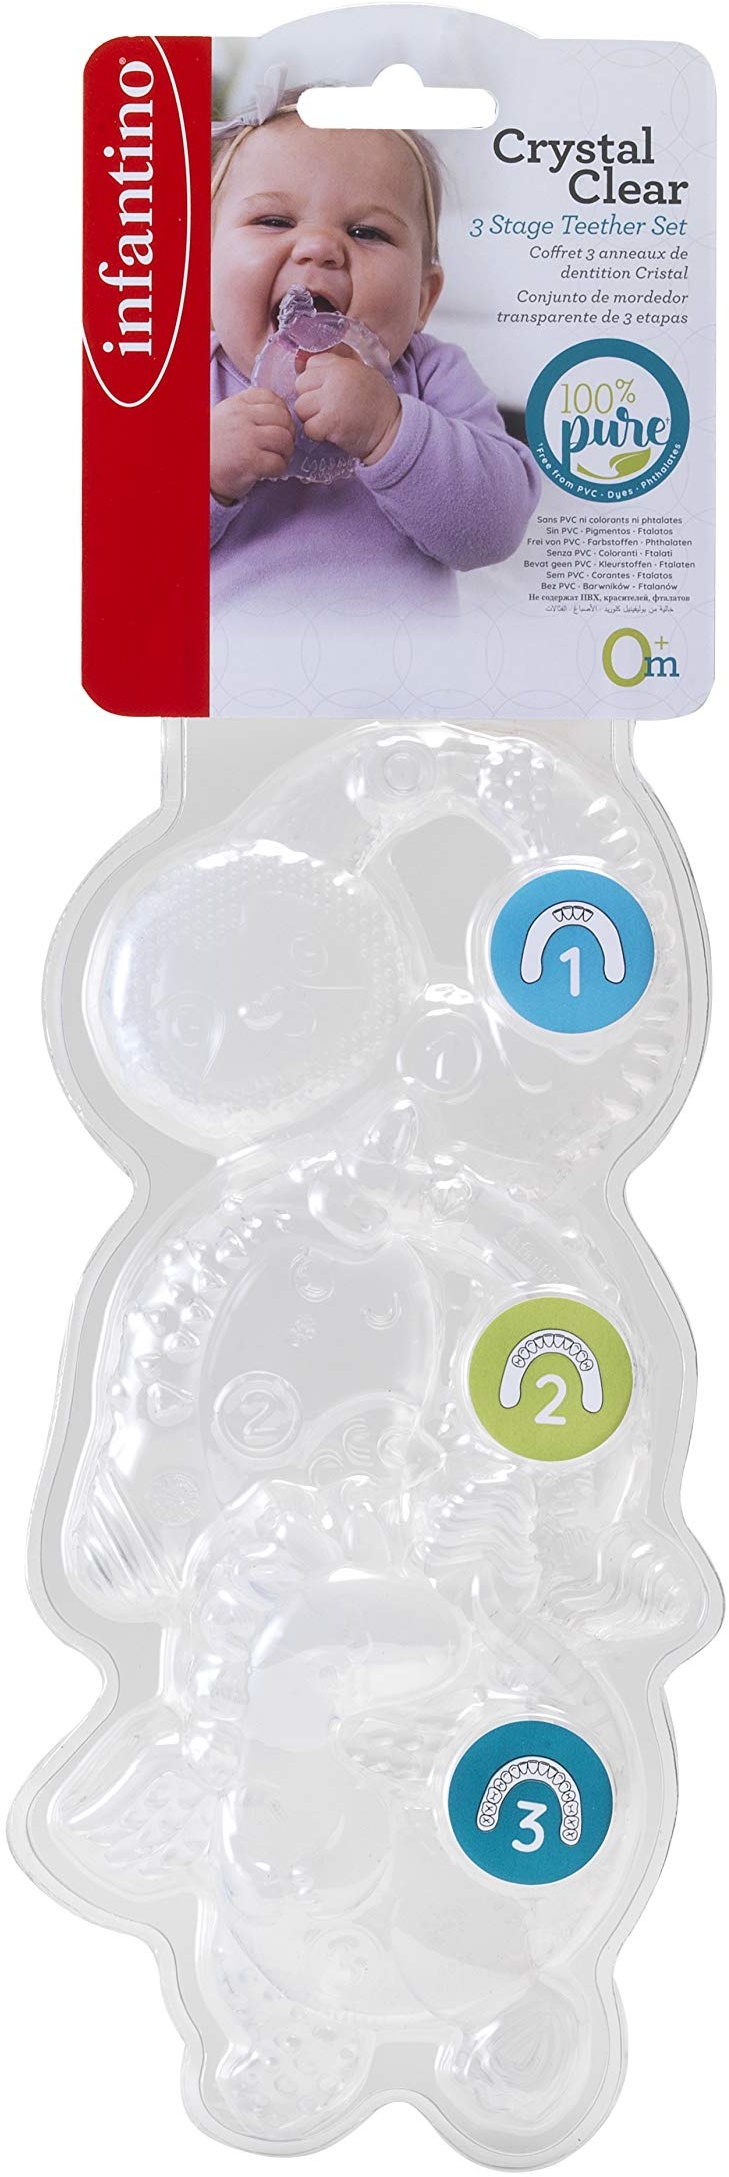 INFANTINO White Crystal Clear 3 Stage Teether Set - 3 Soft-Textured teethers for Sensory Exploration and Teething Relief, Silicone Free from BPA, PVC, Dyes and phthalates